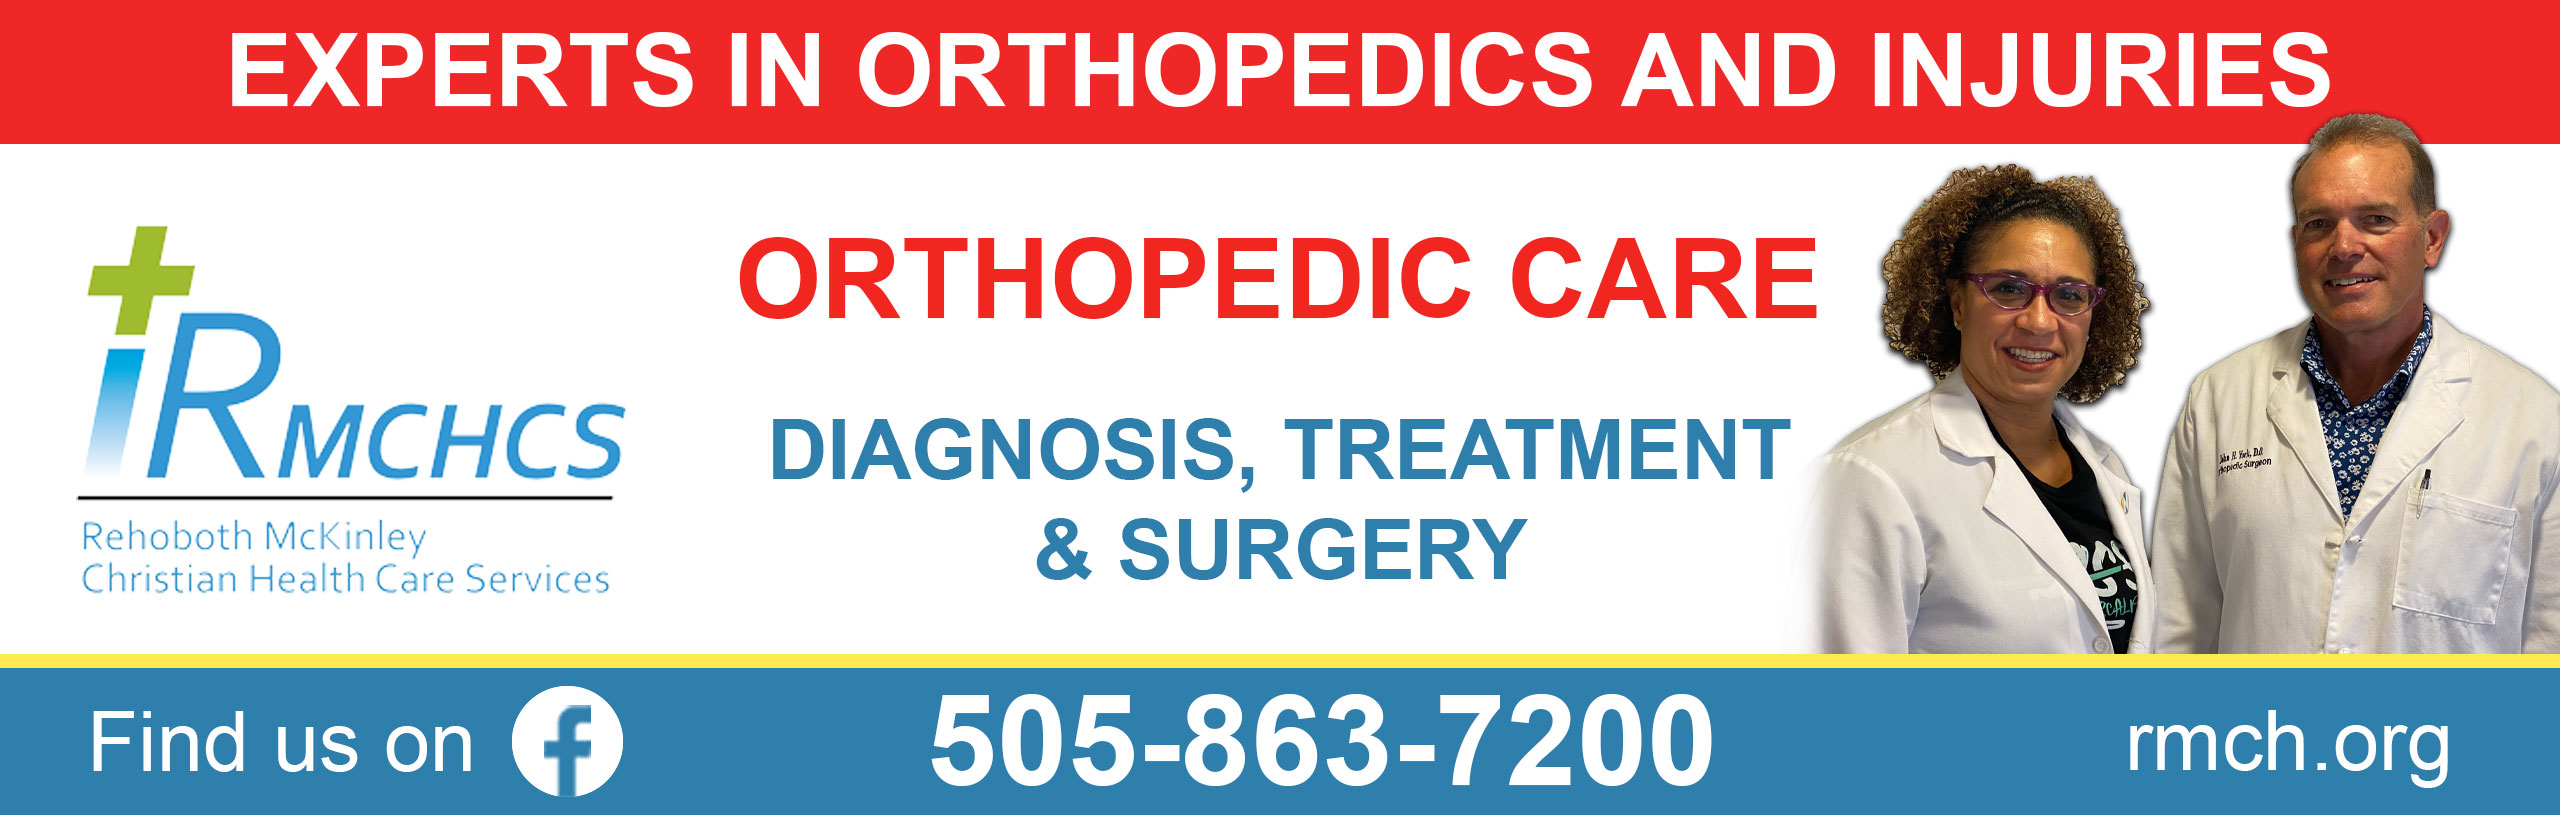 Banner picture of a female and male Physician smiling. Banner says:
EXPERTS IN ORTHOPEDICS AND INJURIES
ORTHOPEDIC CARE
DIAGNOSIS, TREATMEANT, & SURGERY
RMCHCS
Rehoboth Mckinley Christian Health Care Services

Find us on Facebook 
505-863-7200
rich.org